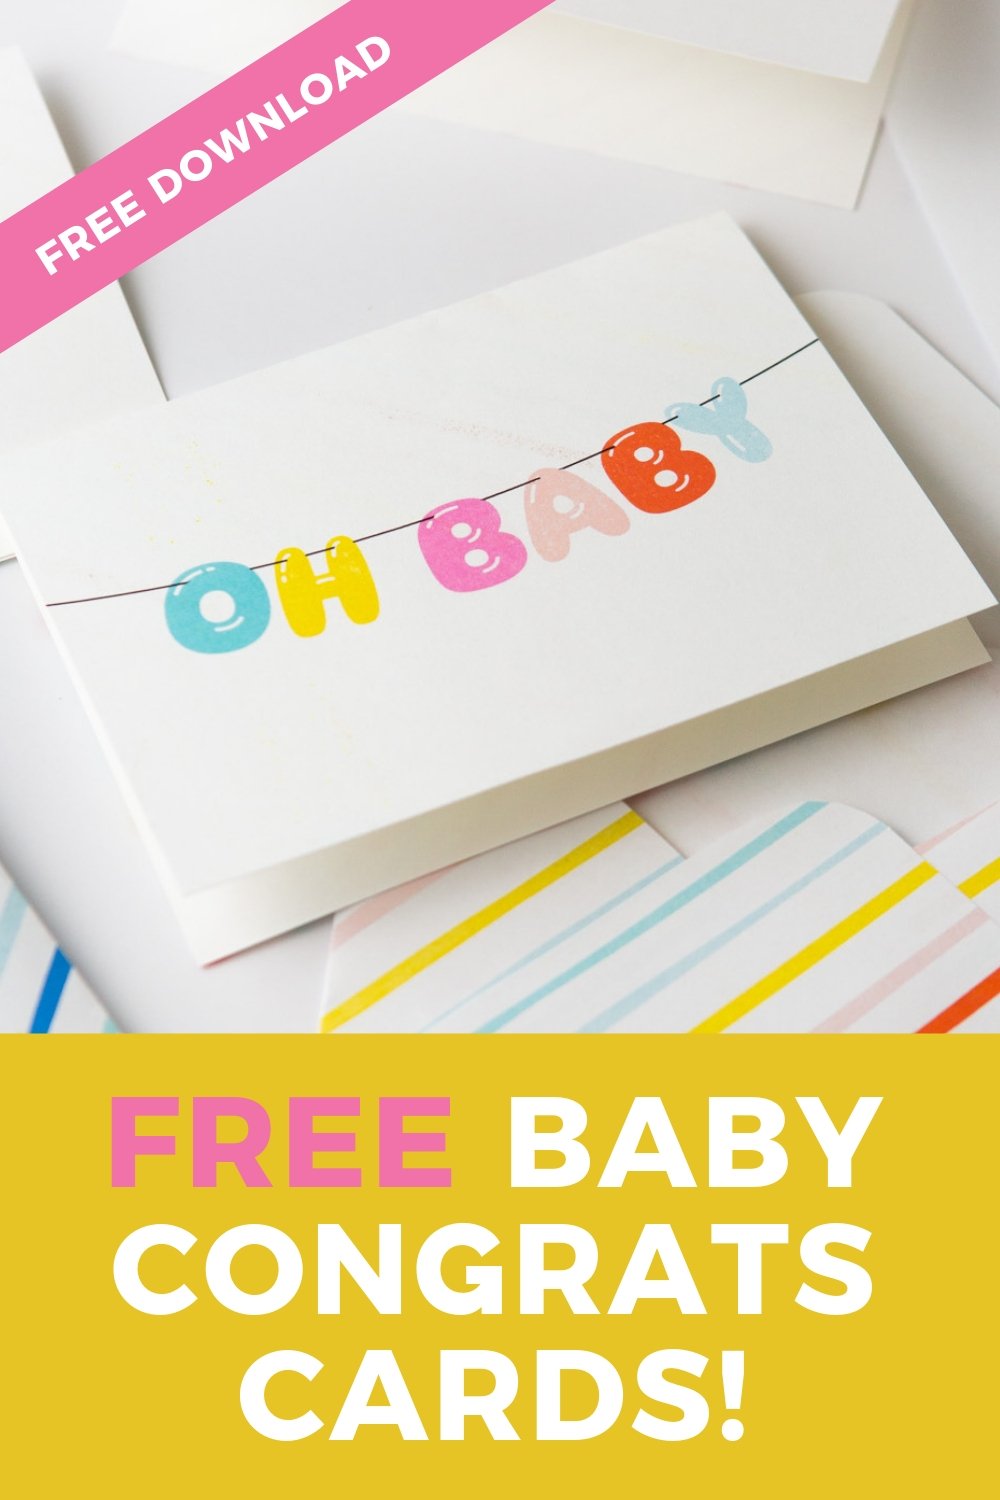 printable-congratulations-baby-cards-design-eat-repeat